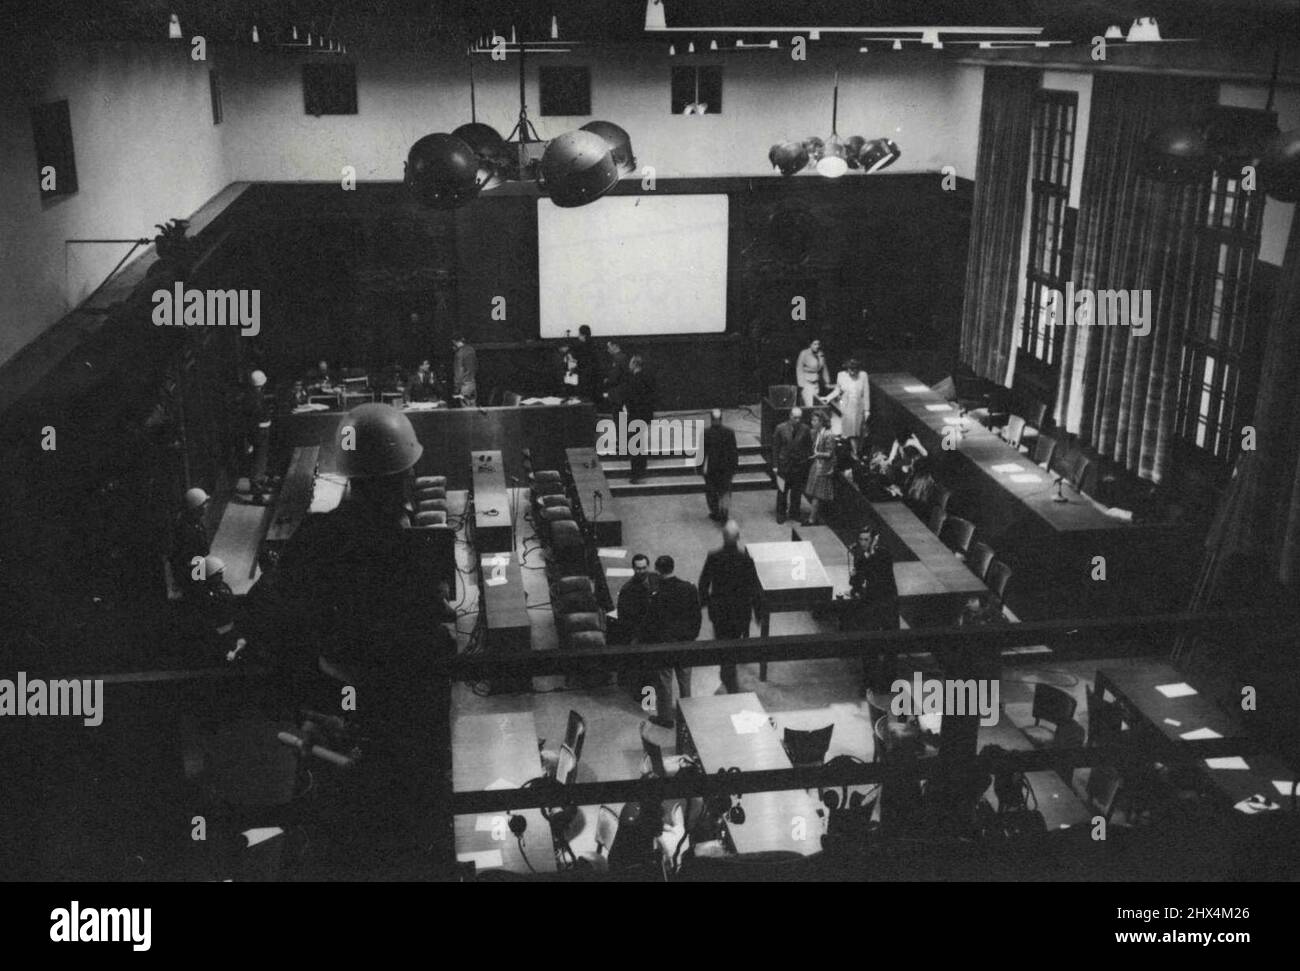 Nuremberg Trial Preliminaries -- A General view of the courtroom in the palace of justice at Nuremberg, where the war criminals are to be tried. On the left of the picture is the prisoners dock - directly facing them on the right side of the picture is the judges desk. To the right of the screen is seen the witness-box. Everything is set form the coming war criminal trials to be held at Nuremberg. A Mock trial has been held in the palace of justice to test the elaborate mechanical system, by which the trial will be held in four languages. November 16, 1945. (Photo by Associated Press Photo). Stock Photo